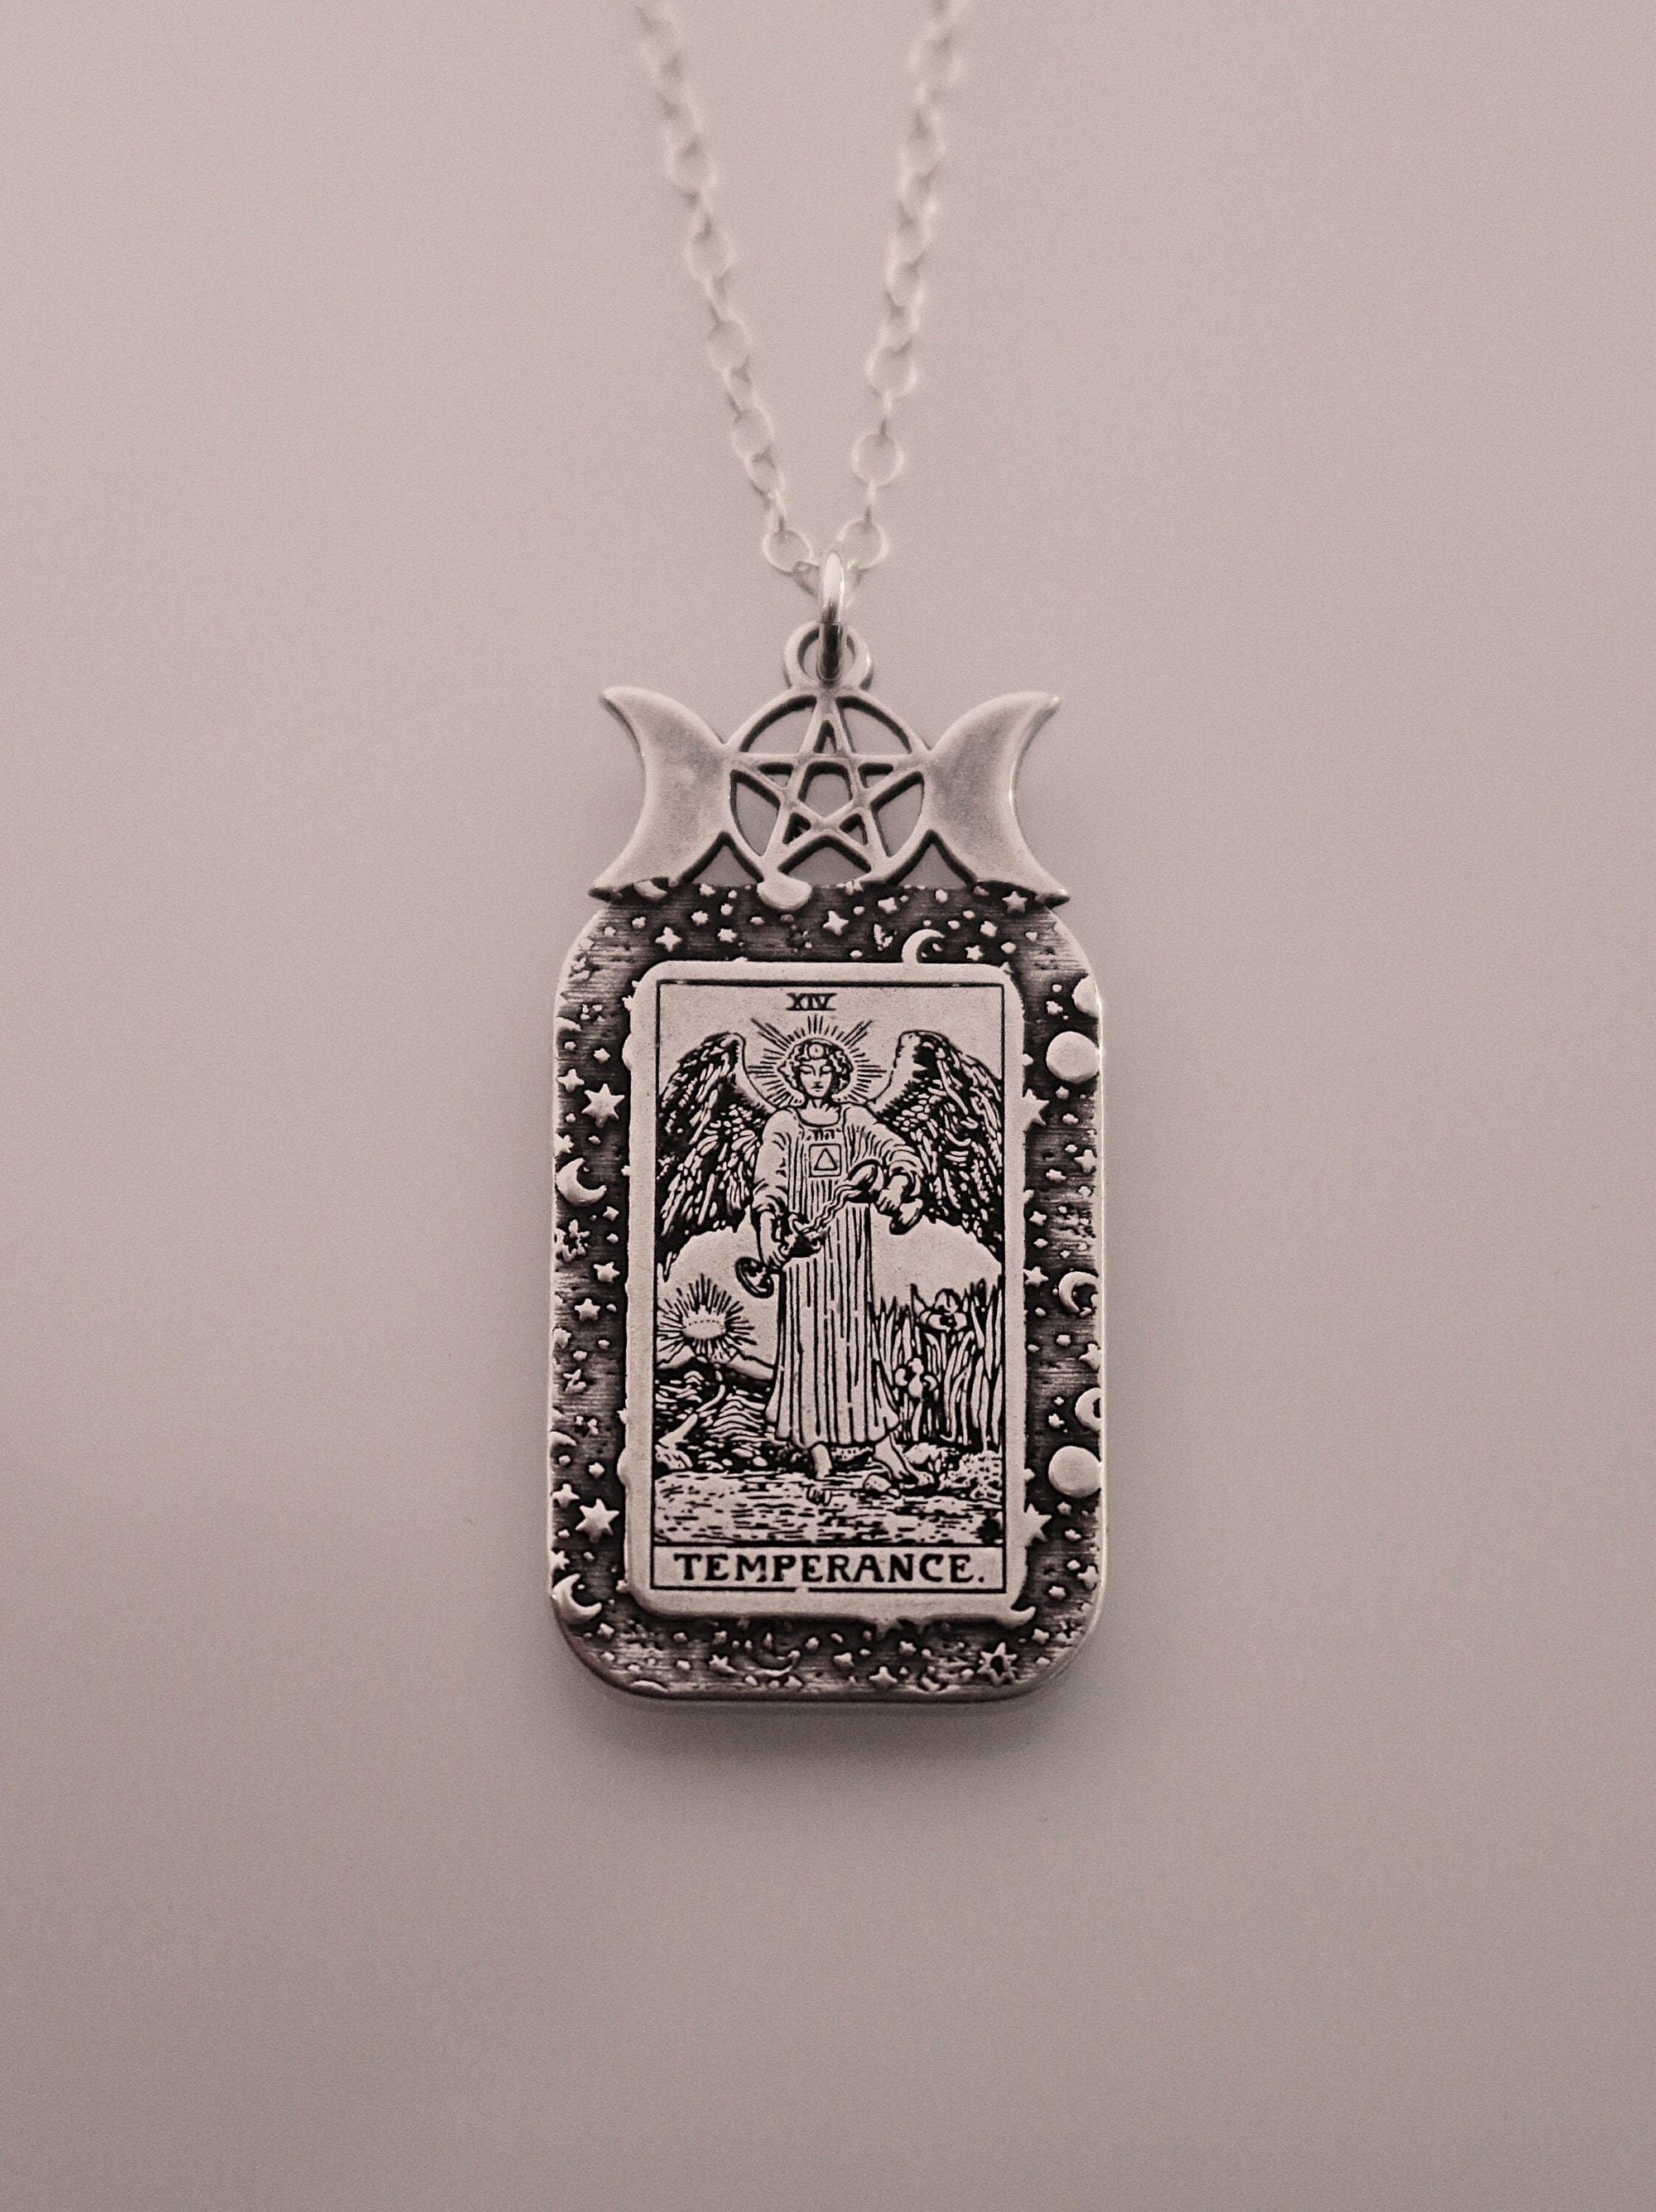 Temperance Tarot Card Necklace | Best Friend Birthday Gift | Tarot Card Necklace | Celestial Triple Moon Goddess Jewelry | Witch Necklace